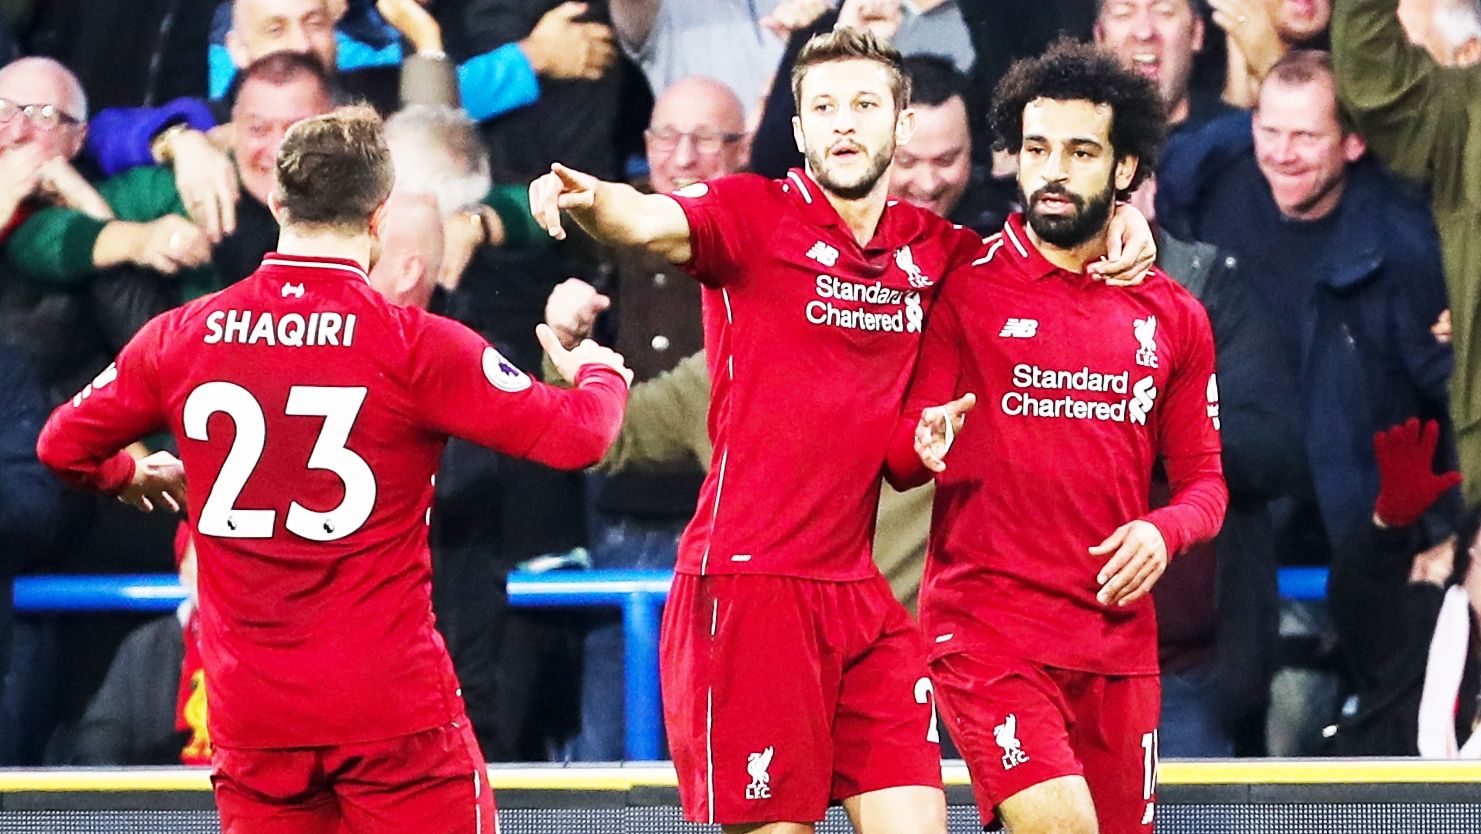 Liverpool's Mohamed Salah 'not worried' over lack of Premier League goals this season